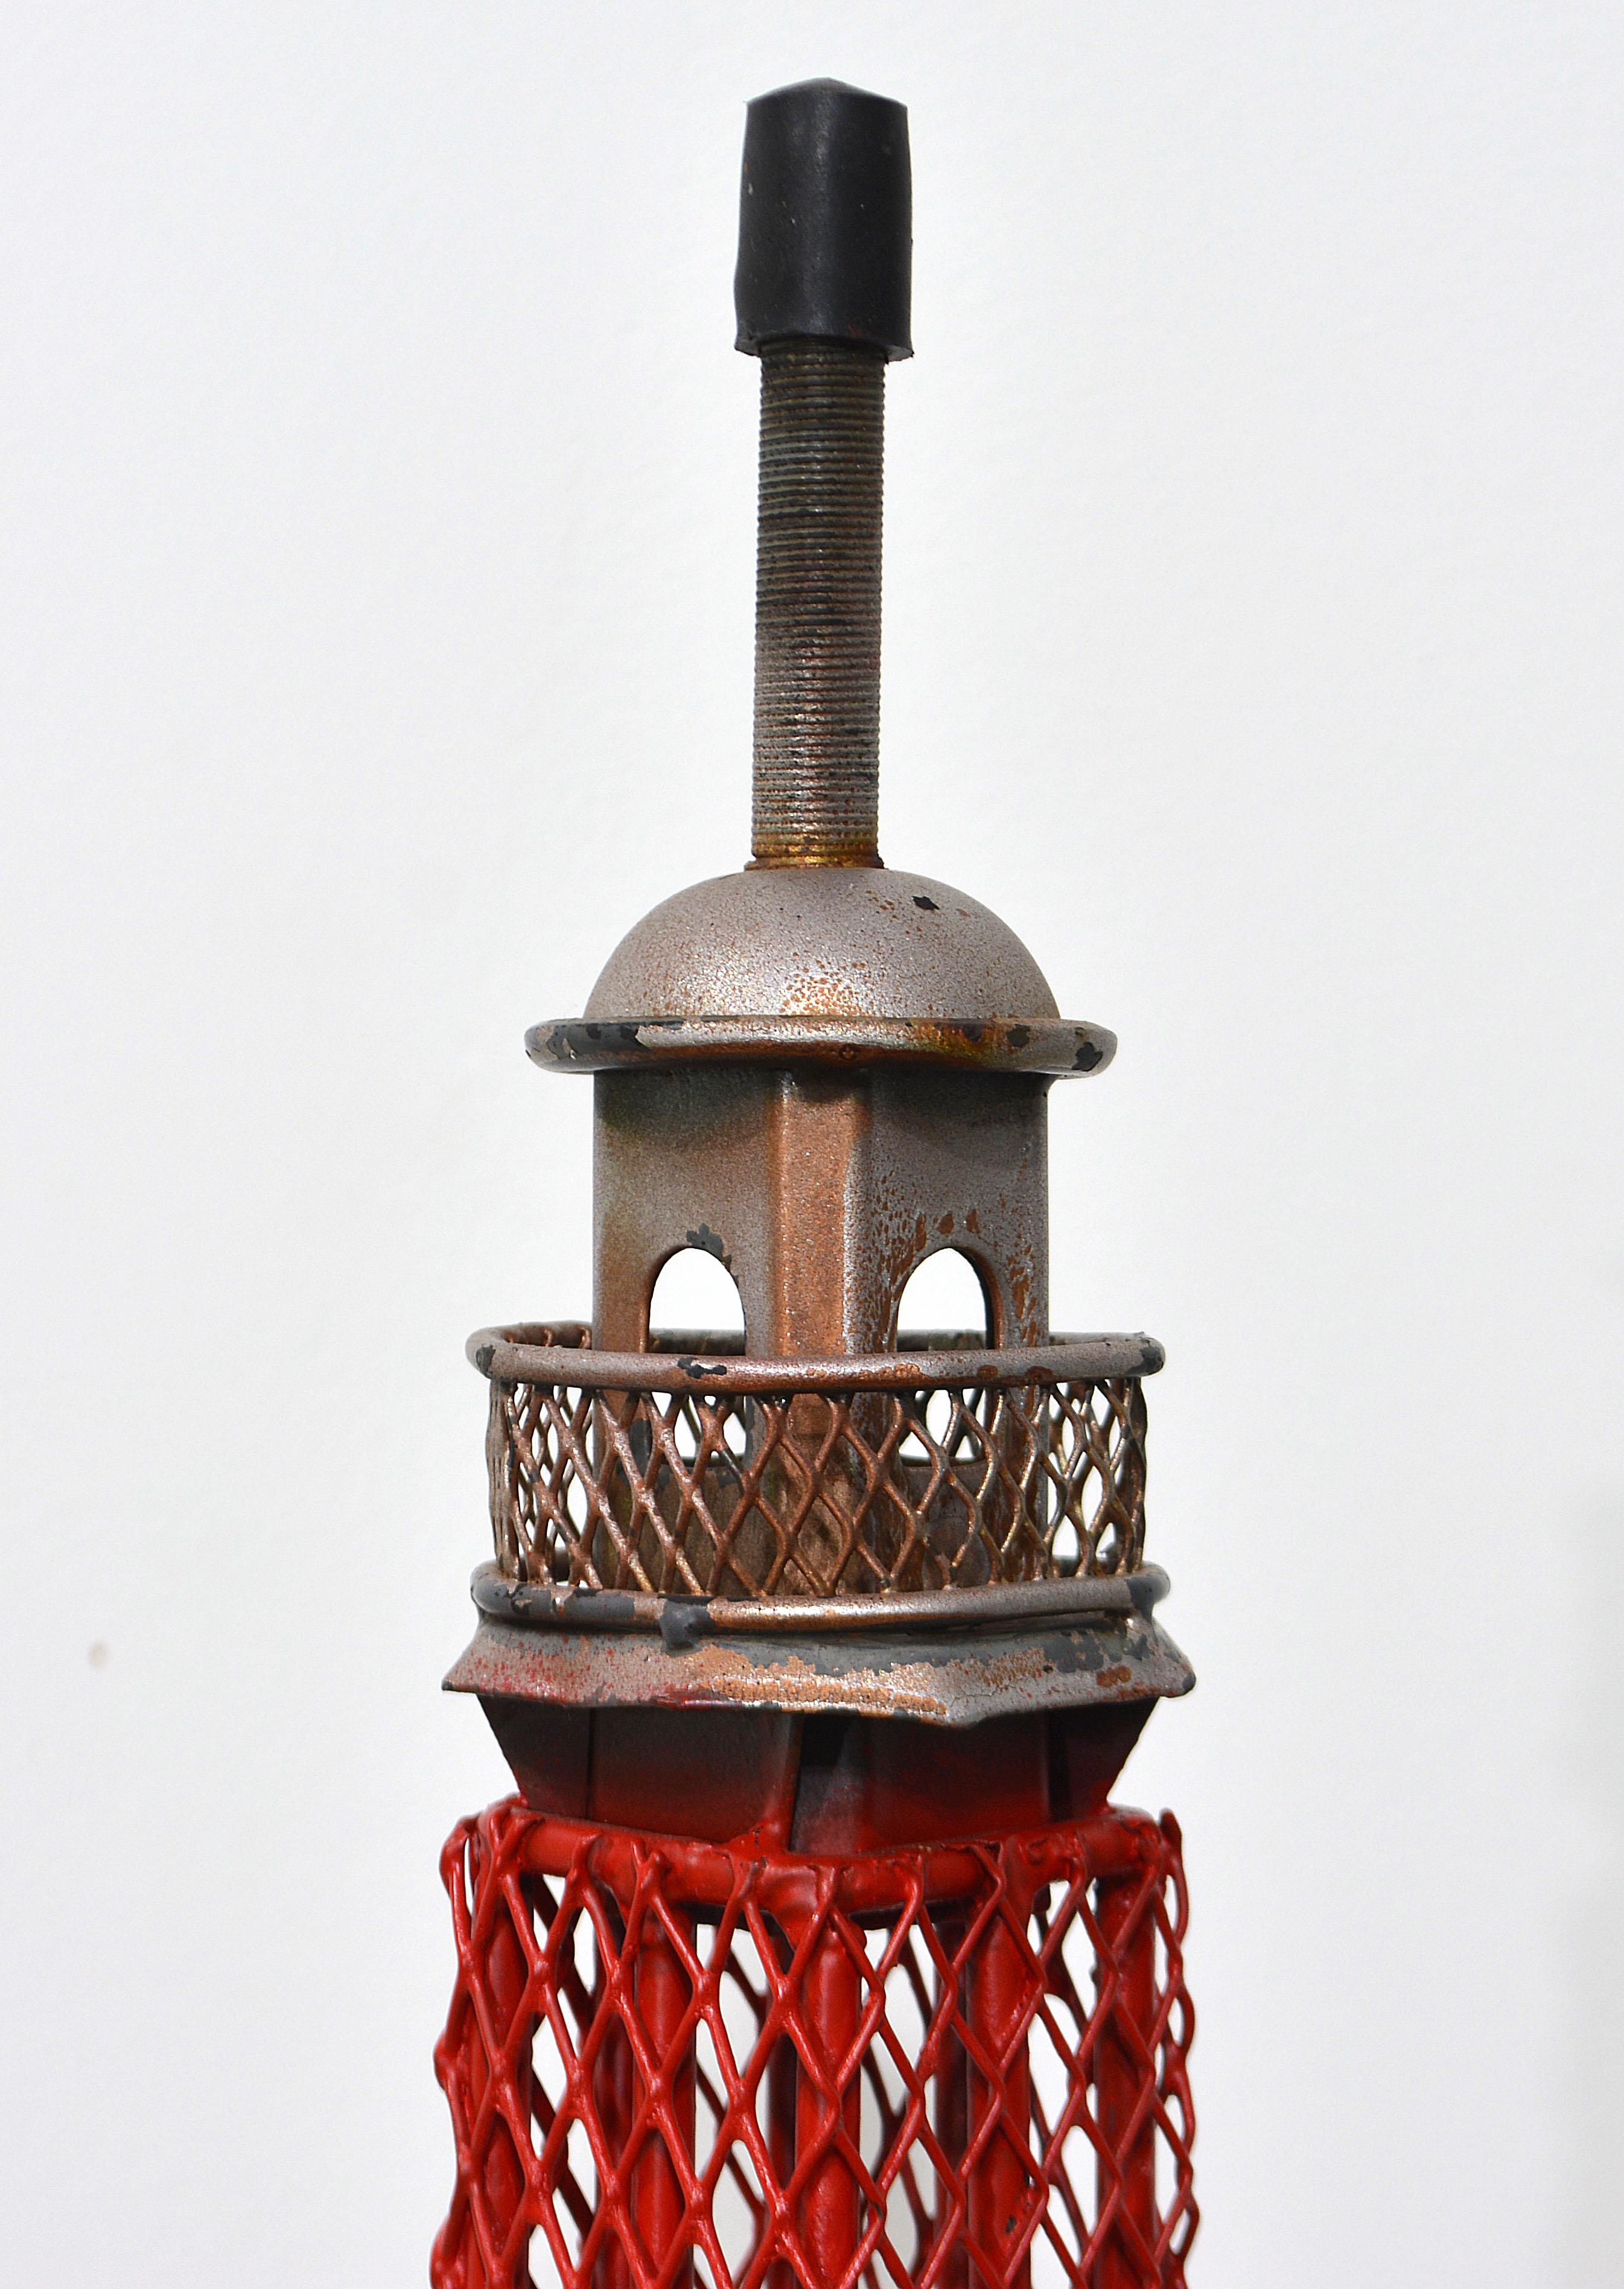 Tall Painted Decorative Steel Eifel Tower Inspired Lighthouse Sculpture or Model In Good Condition For Sale In Ft. Lauderdale, FL